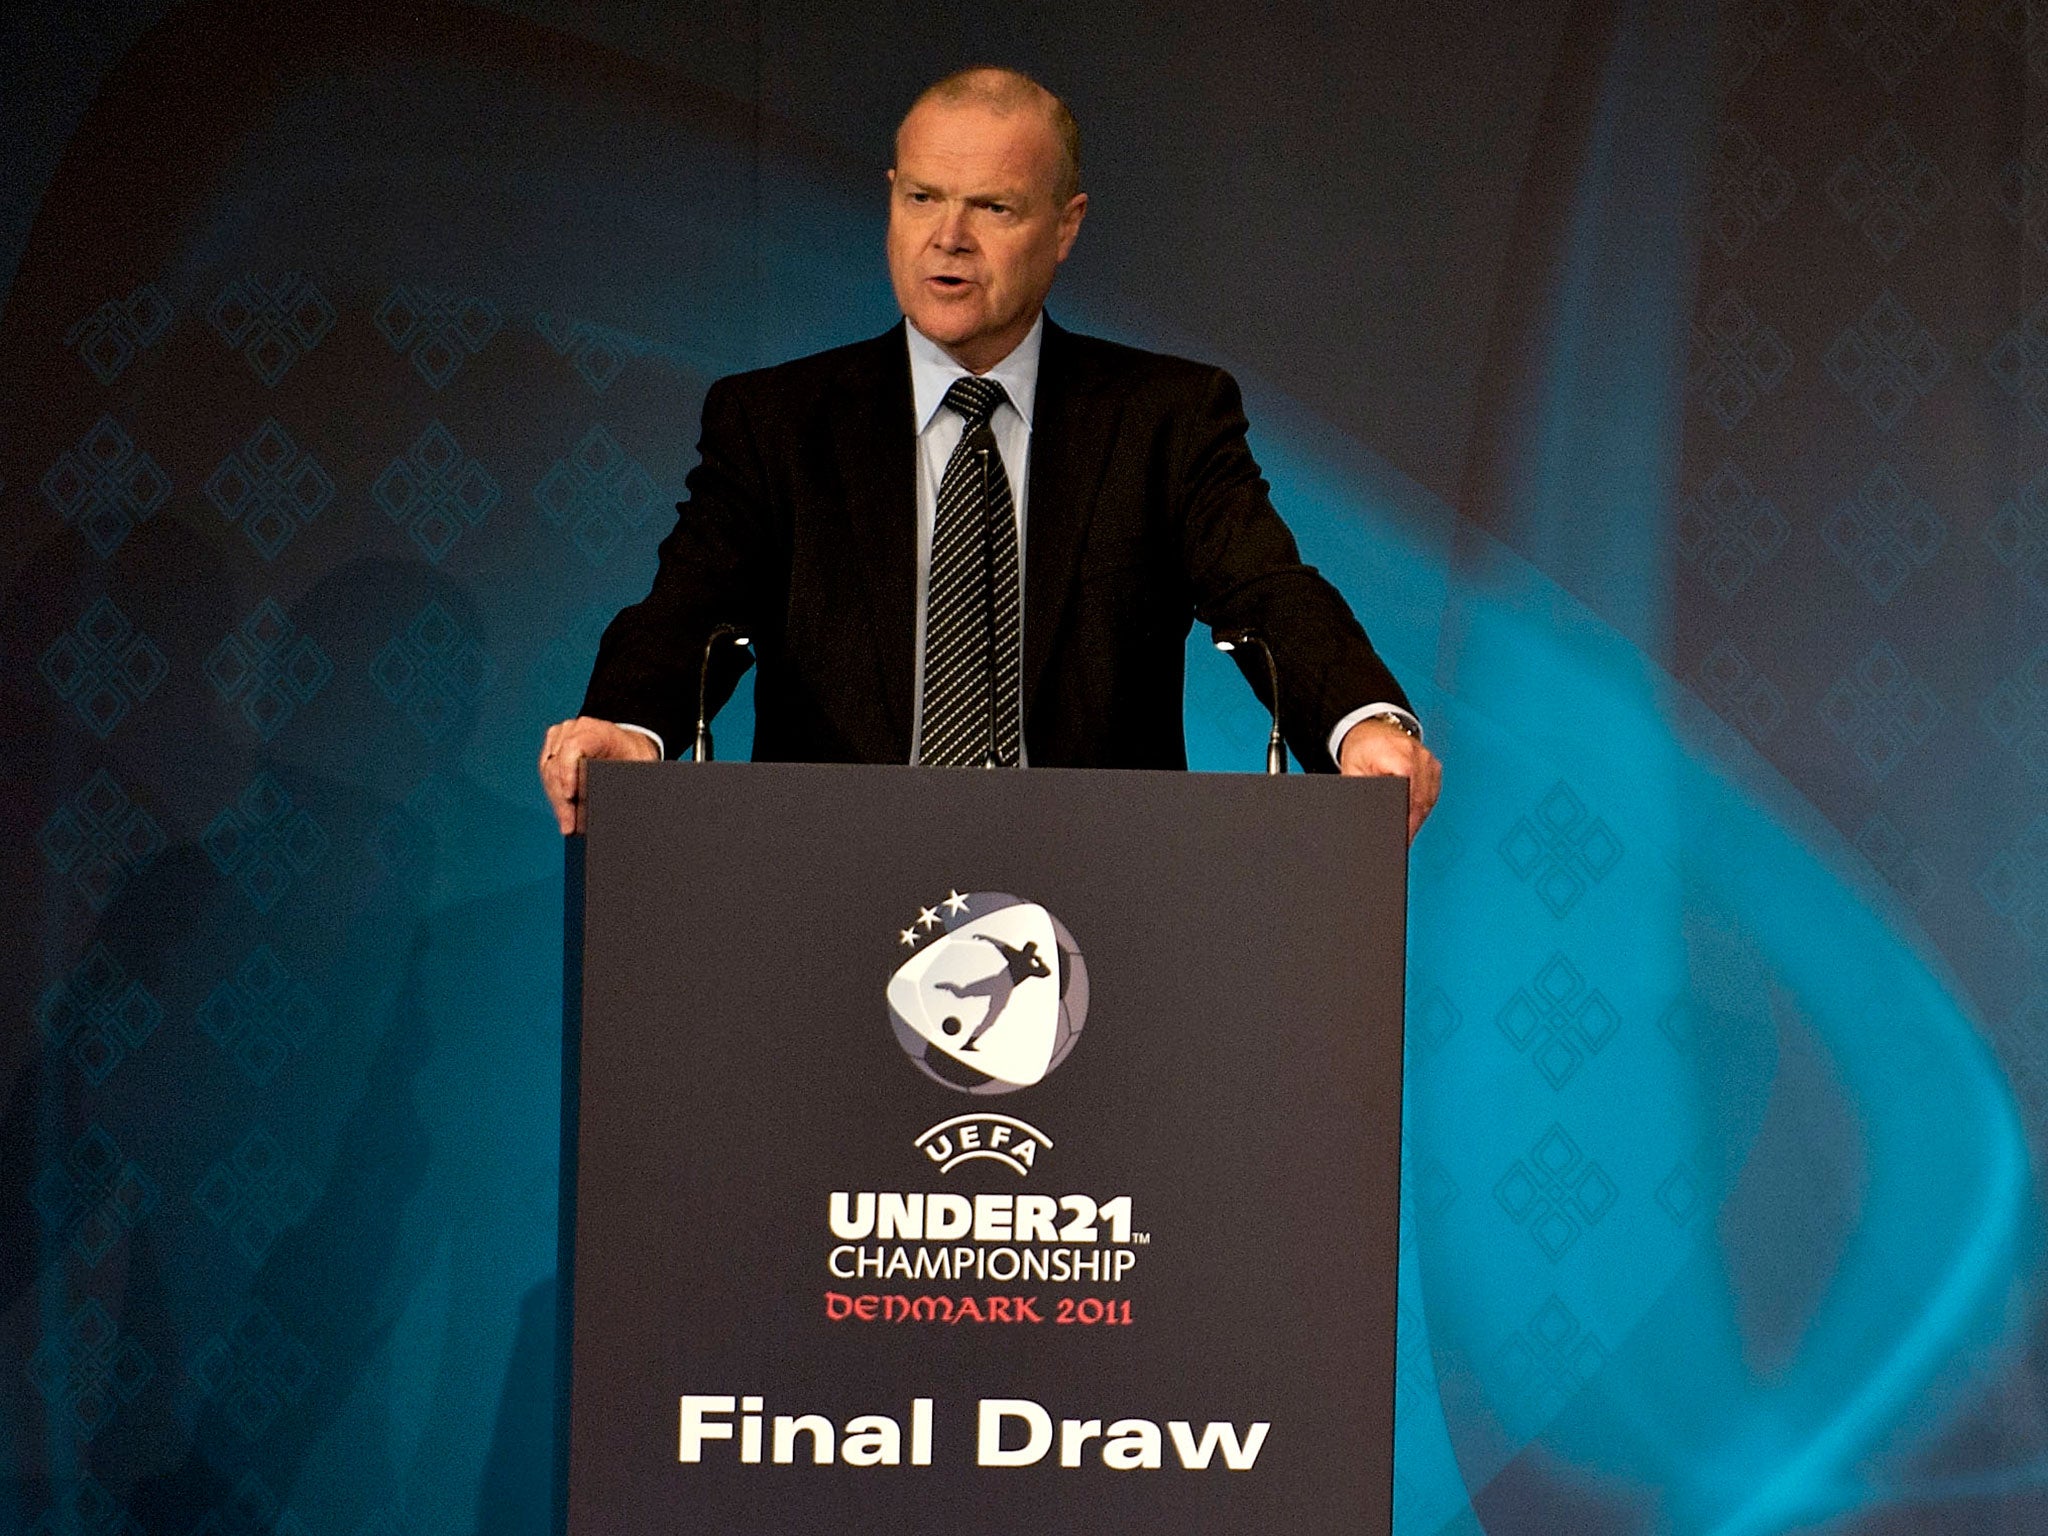 Allan Hansen told The Independent that democracy had not always served Fifa well